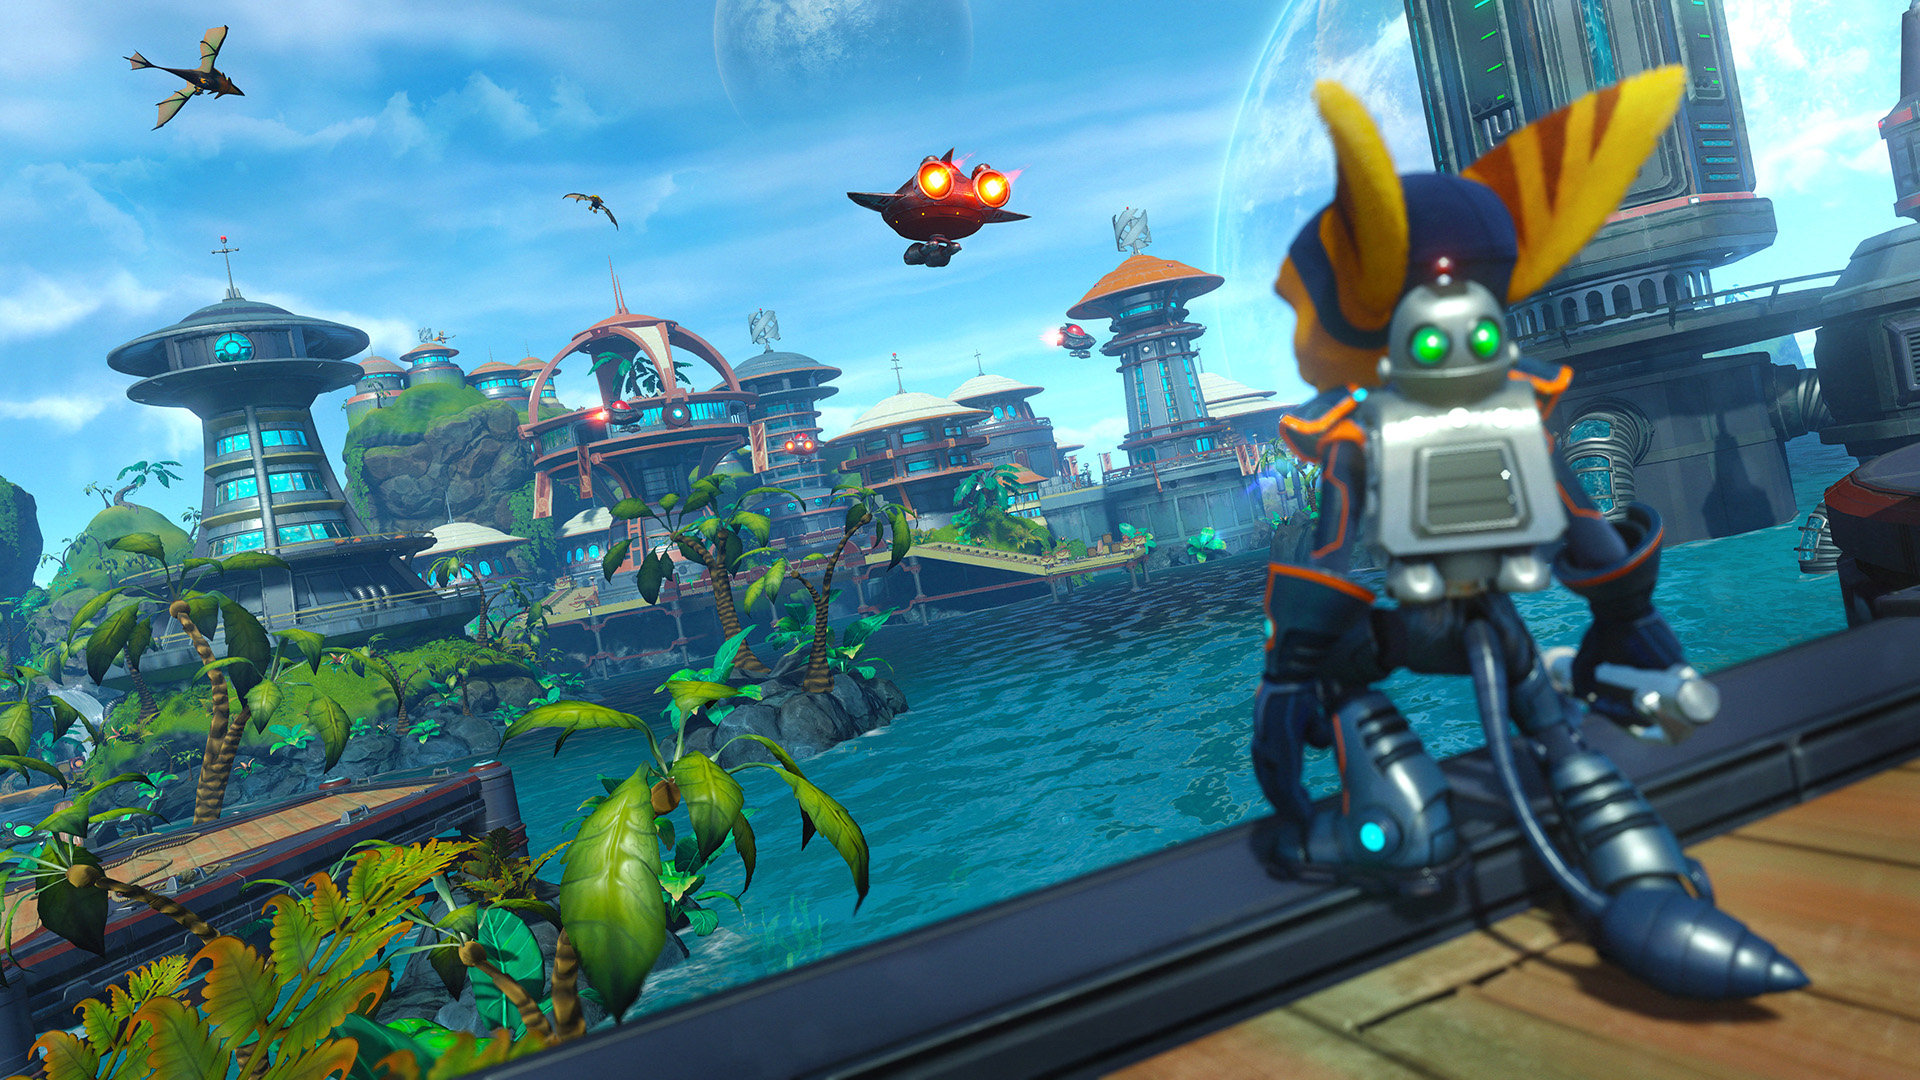 Video Game Ratchet & Clank HD Wallpaper | Background Image